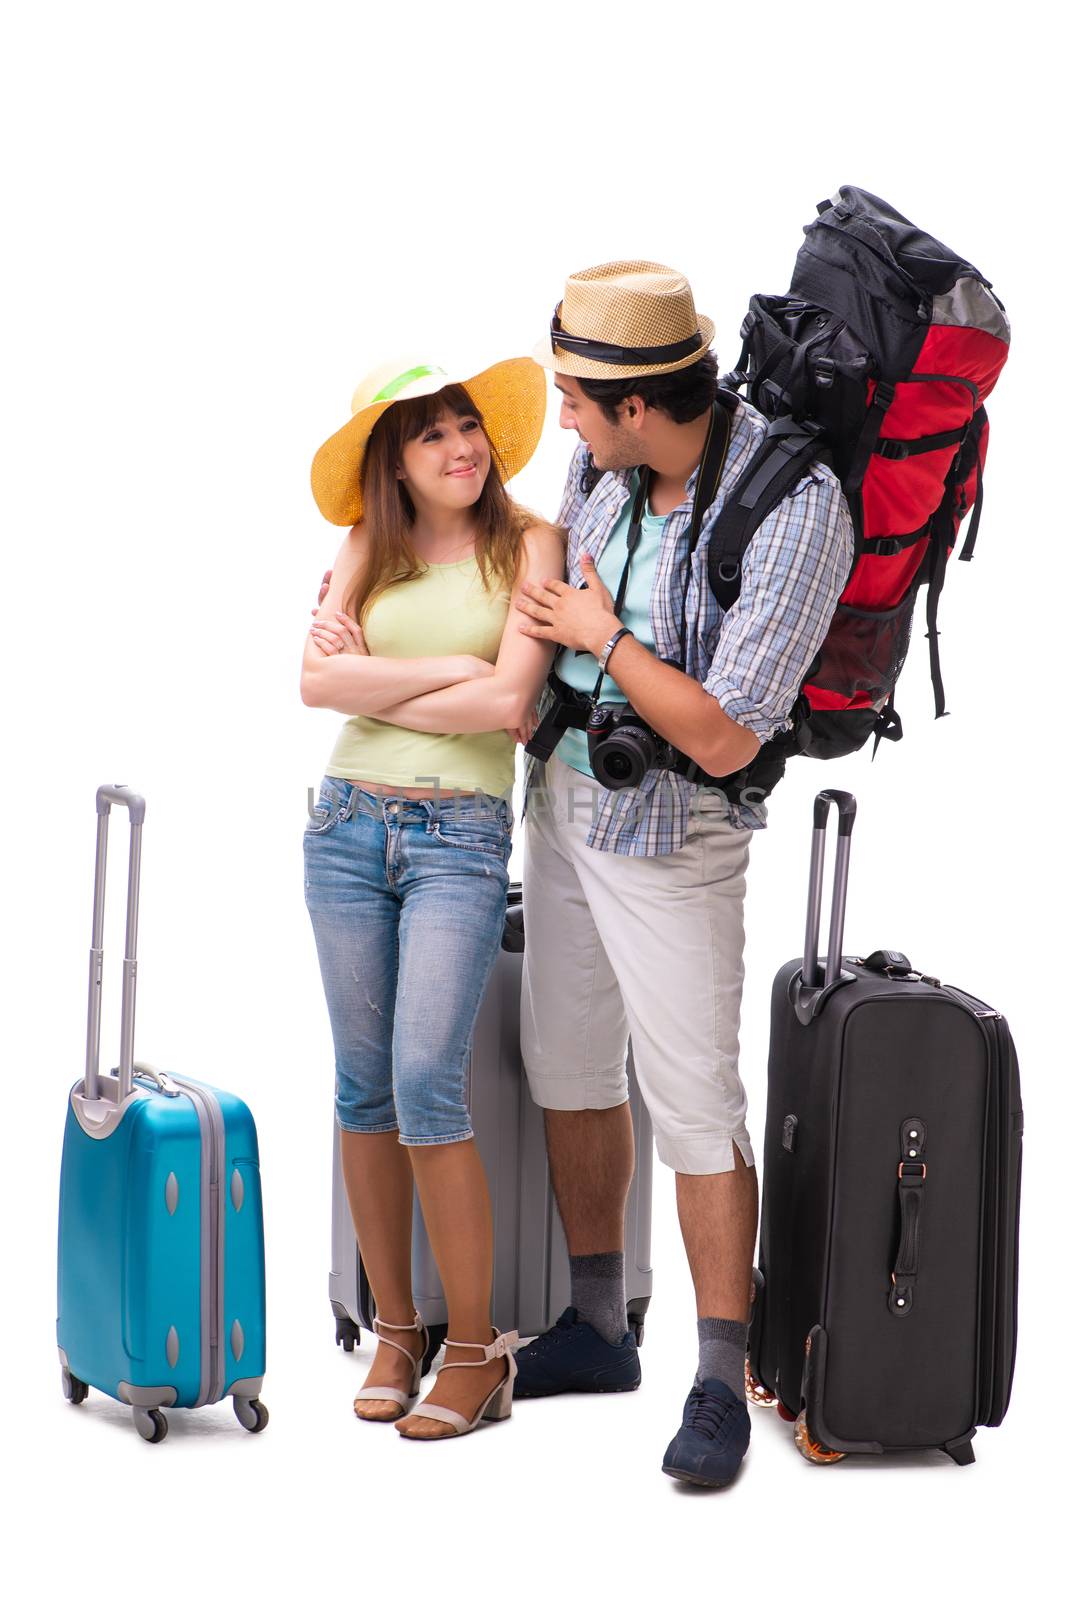 Young family preparing for vacation travel on white by Elnur